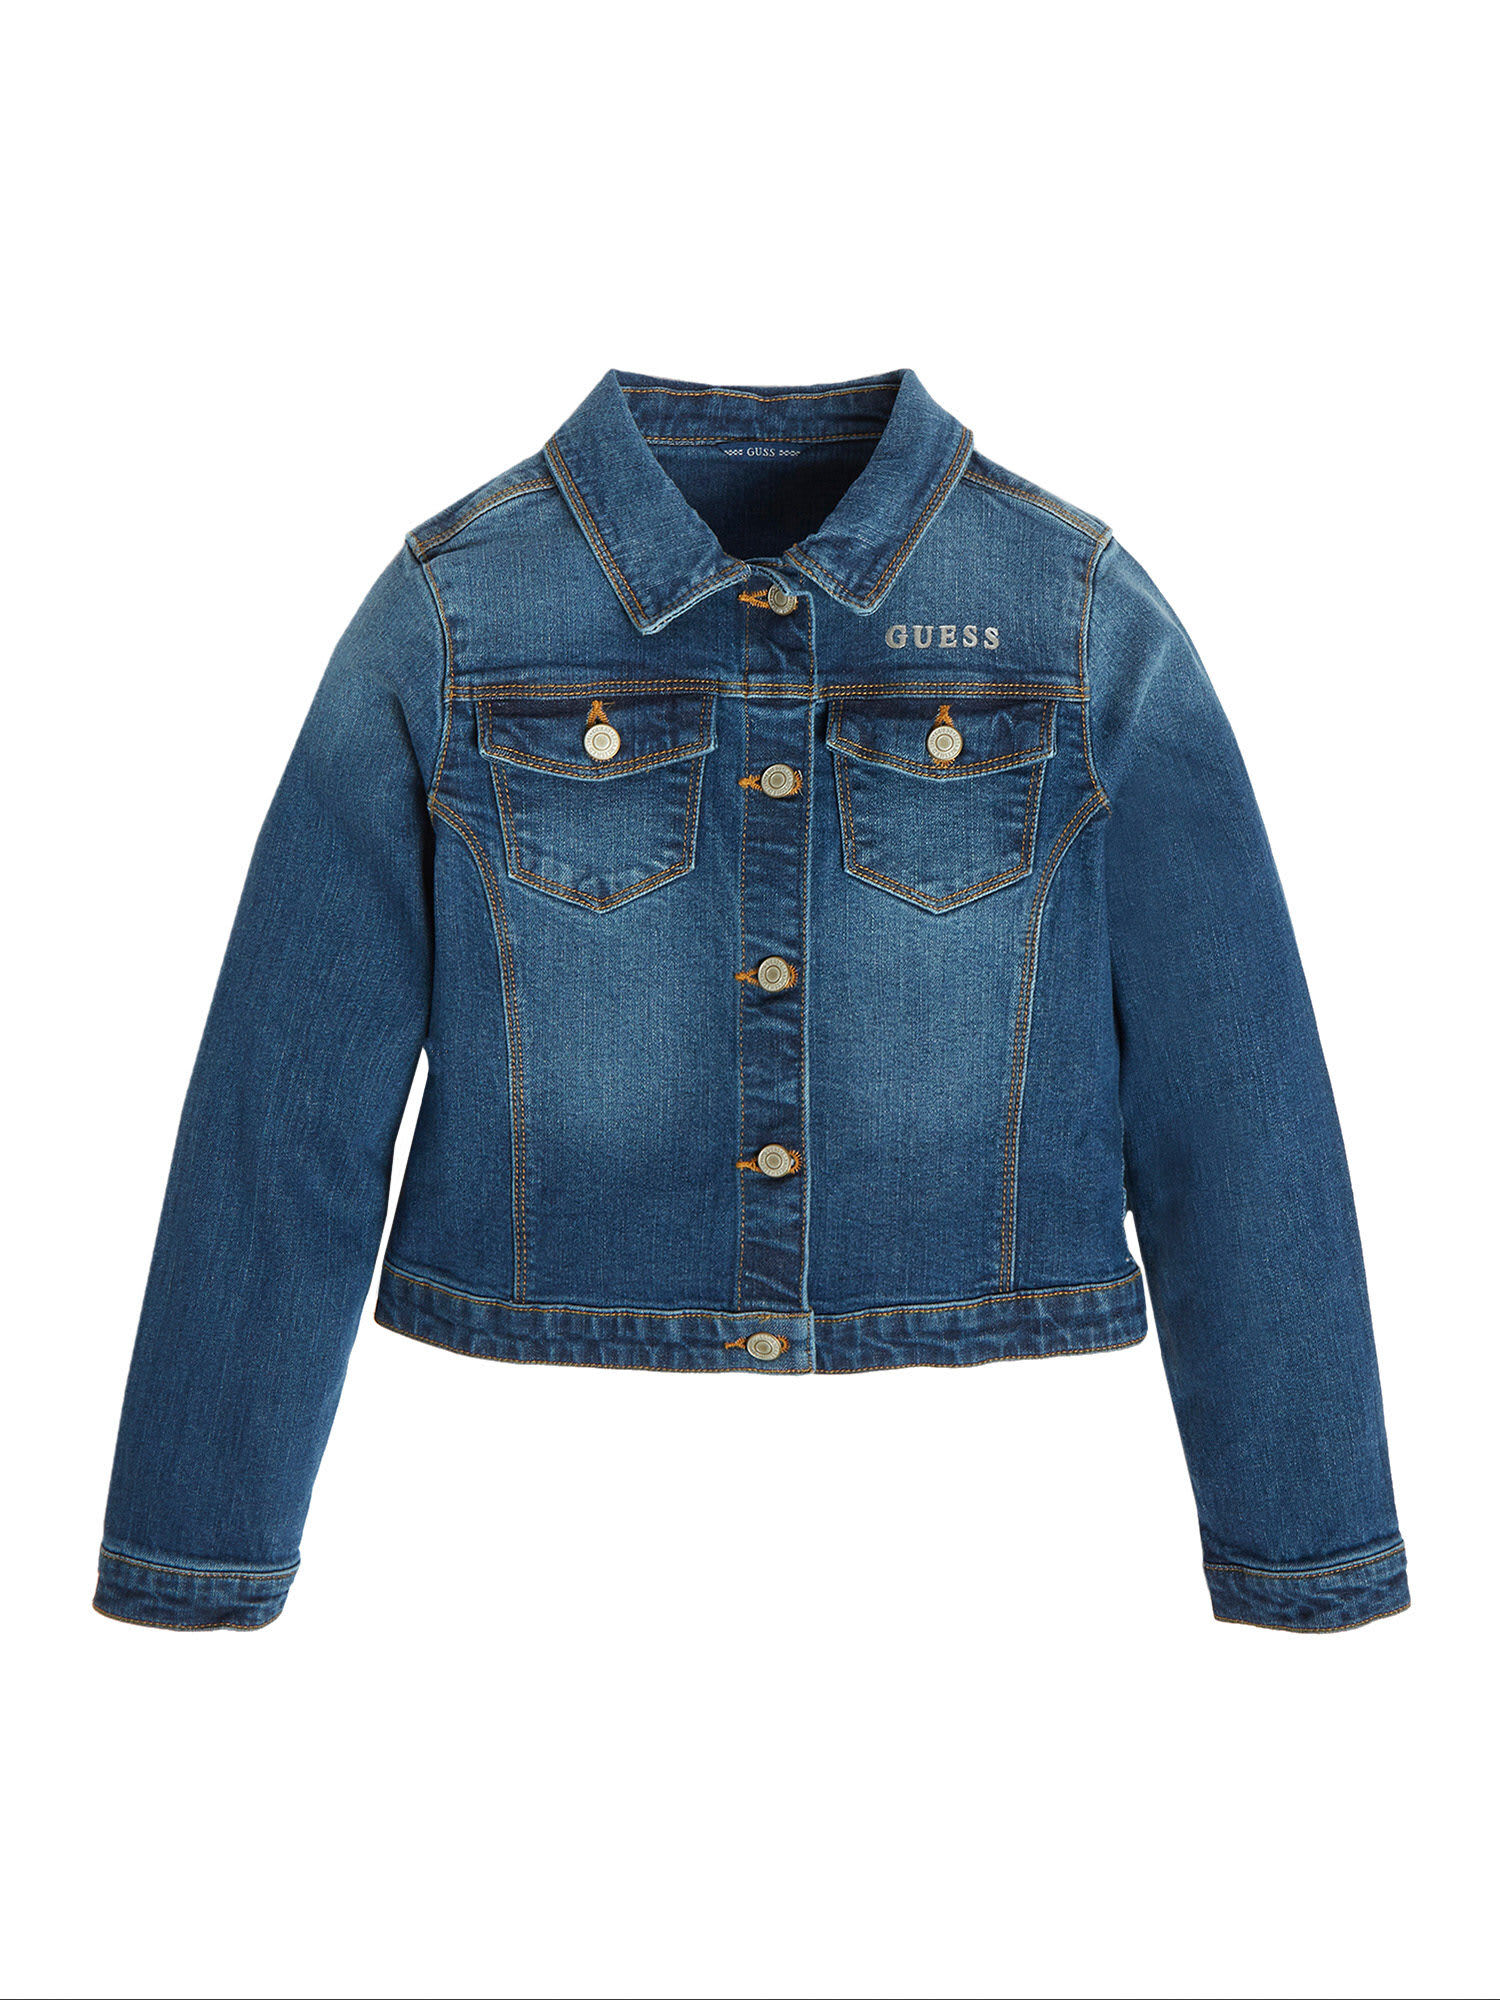 Girls Denim Jacket at Rs.380/Piece in surat offer by green leaf fashion